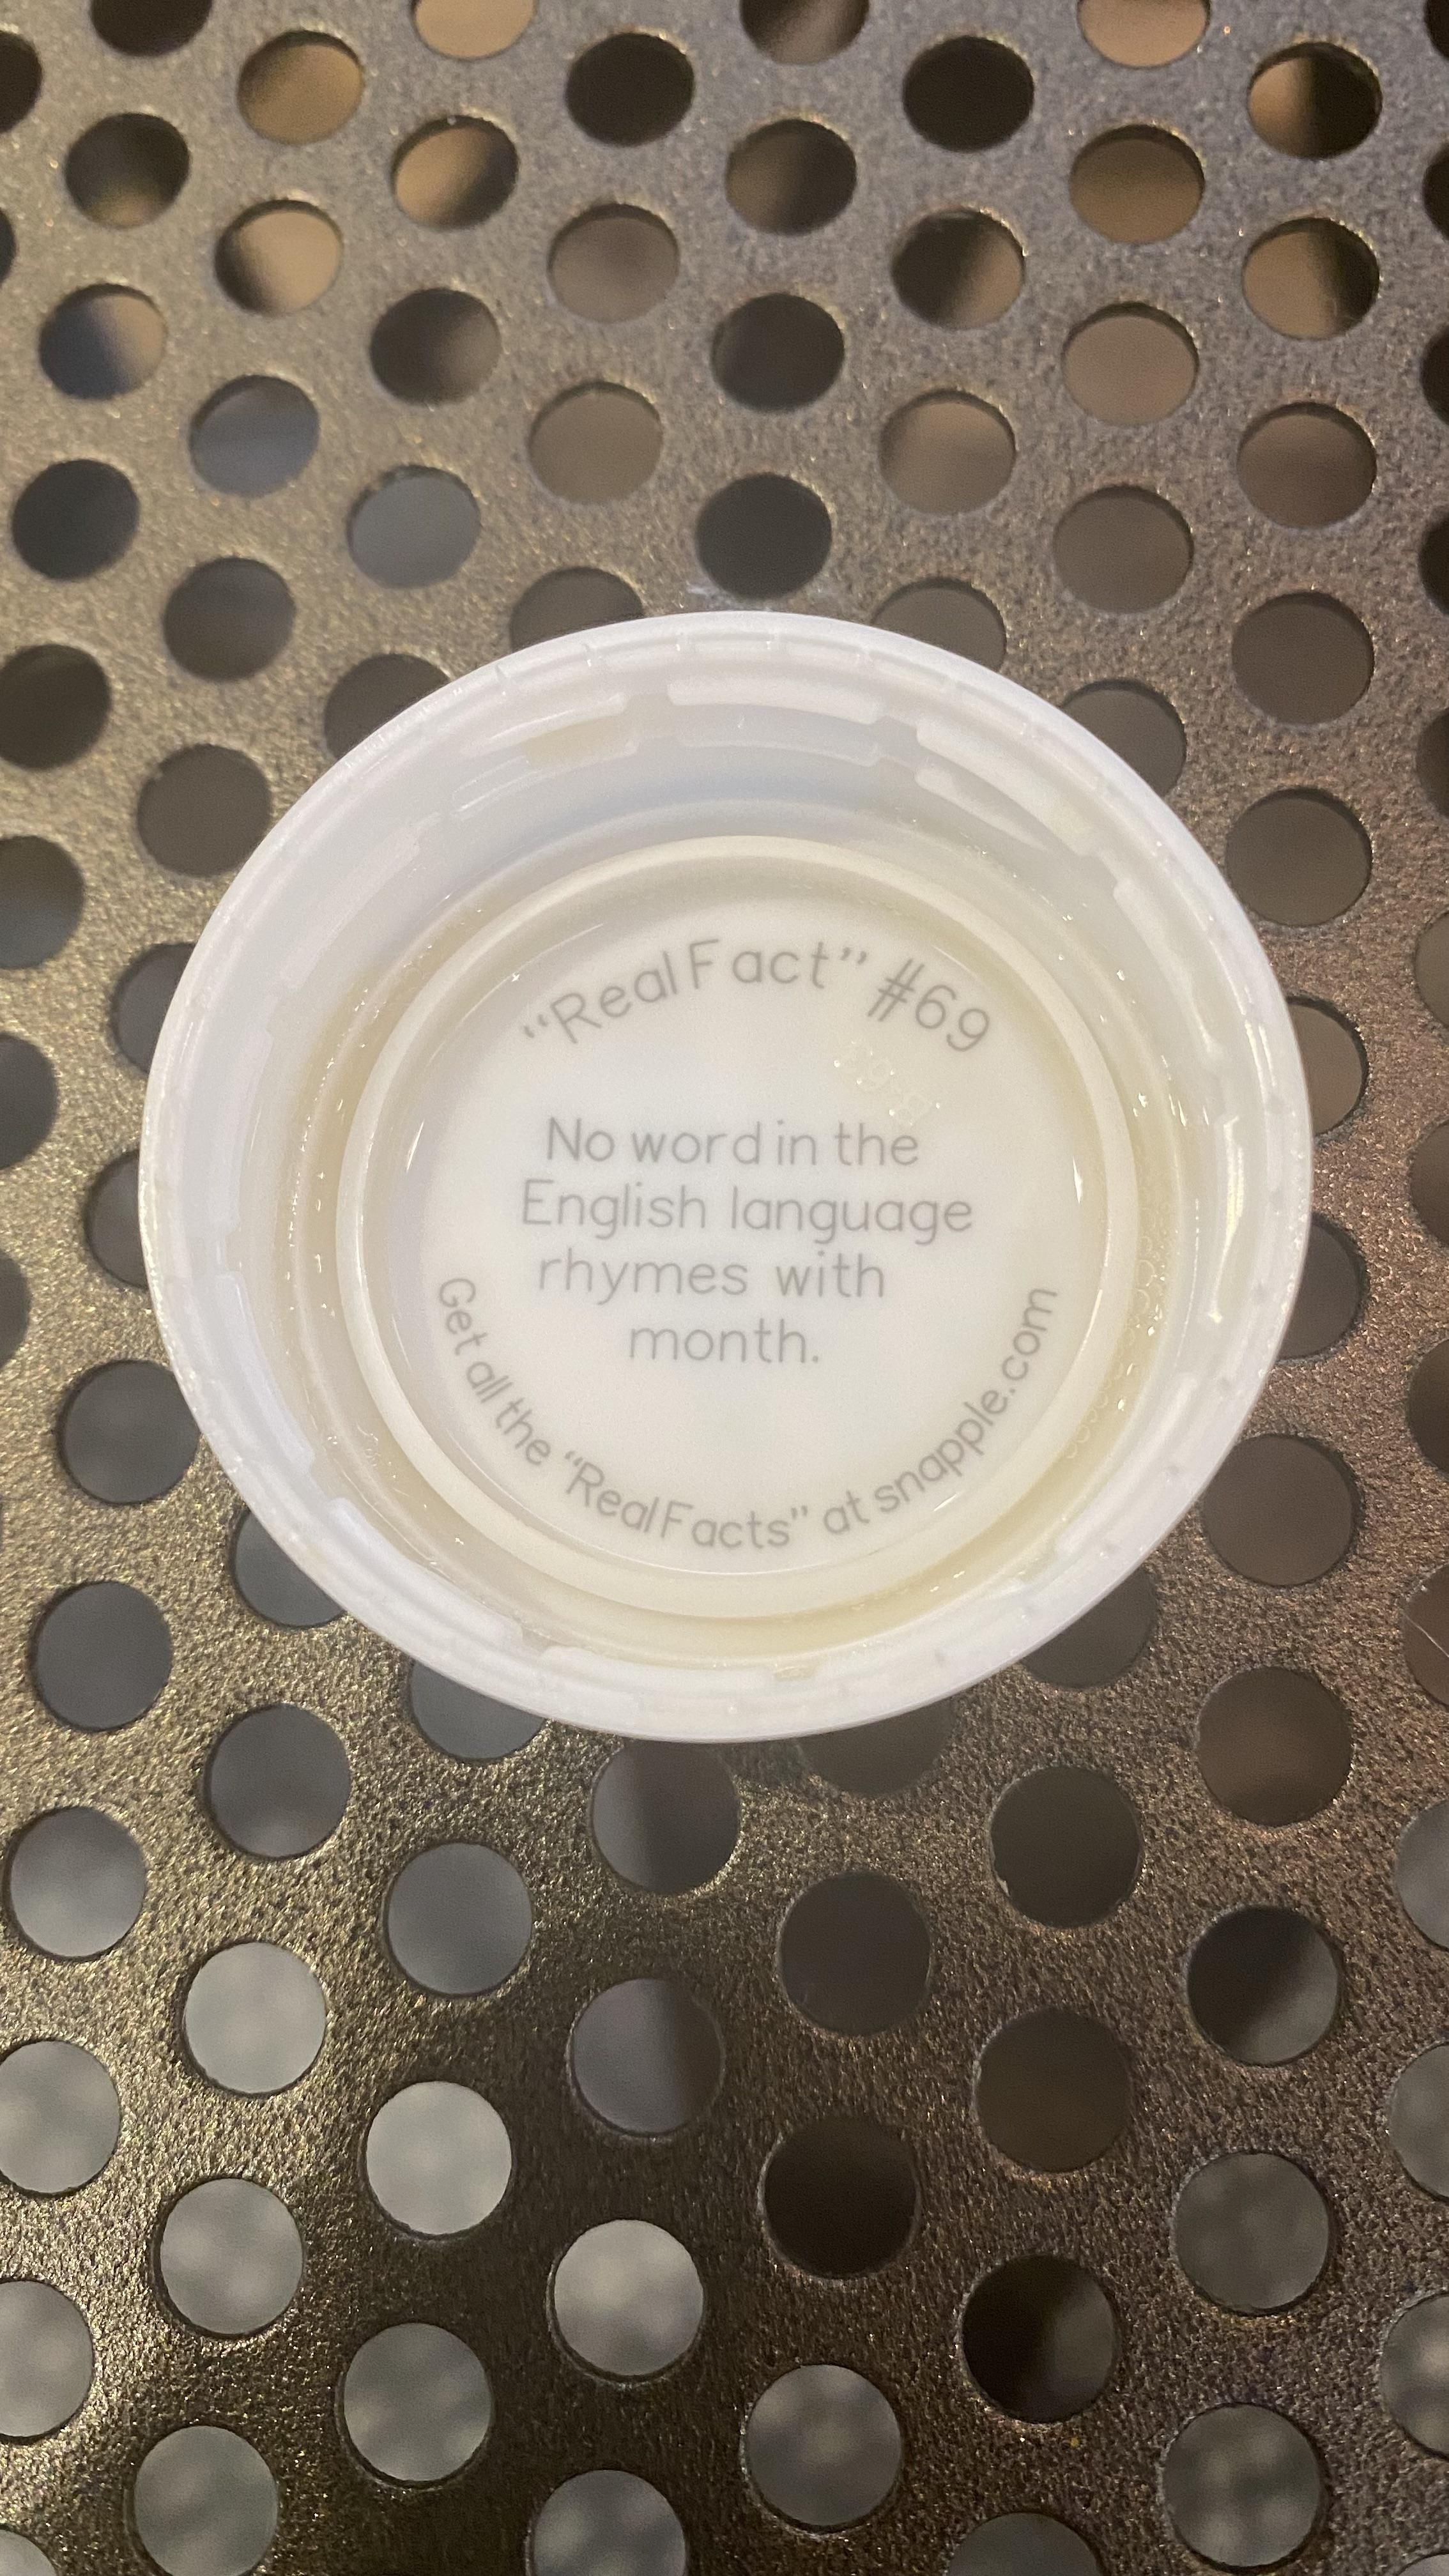 Bought a bottle of Snapple today, got this.